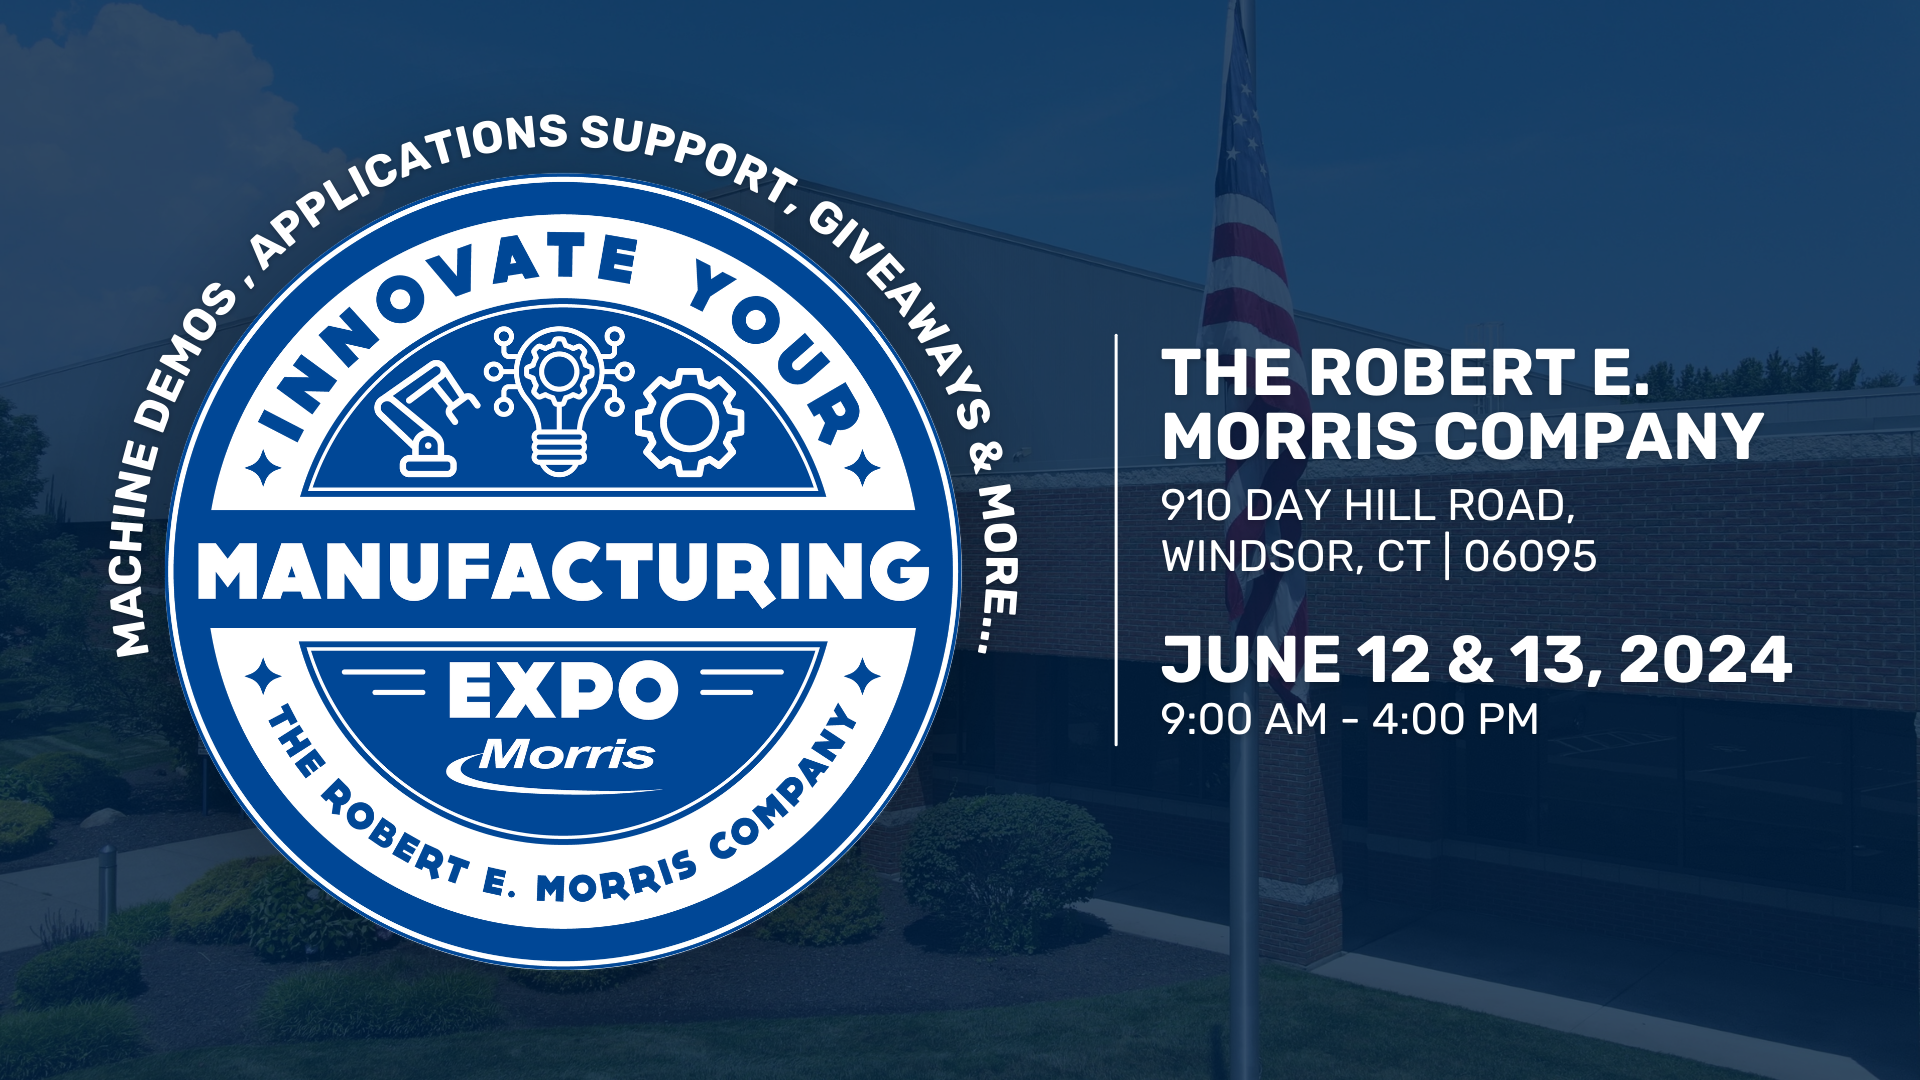 Innovate Your Manufacturing Expo